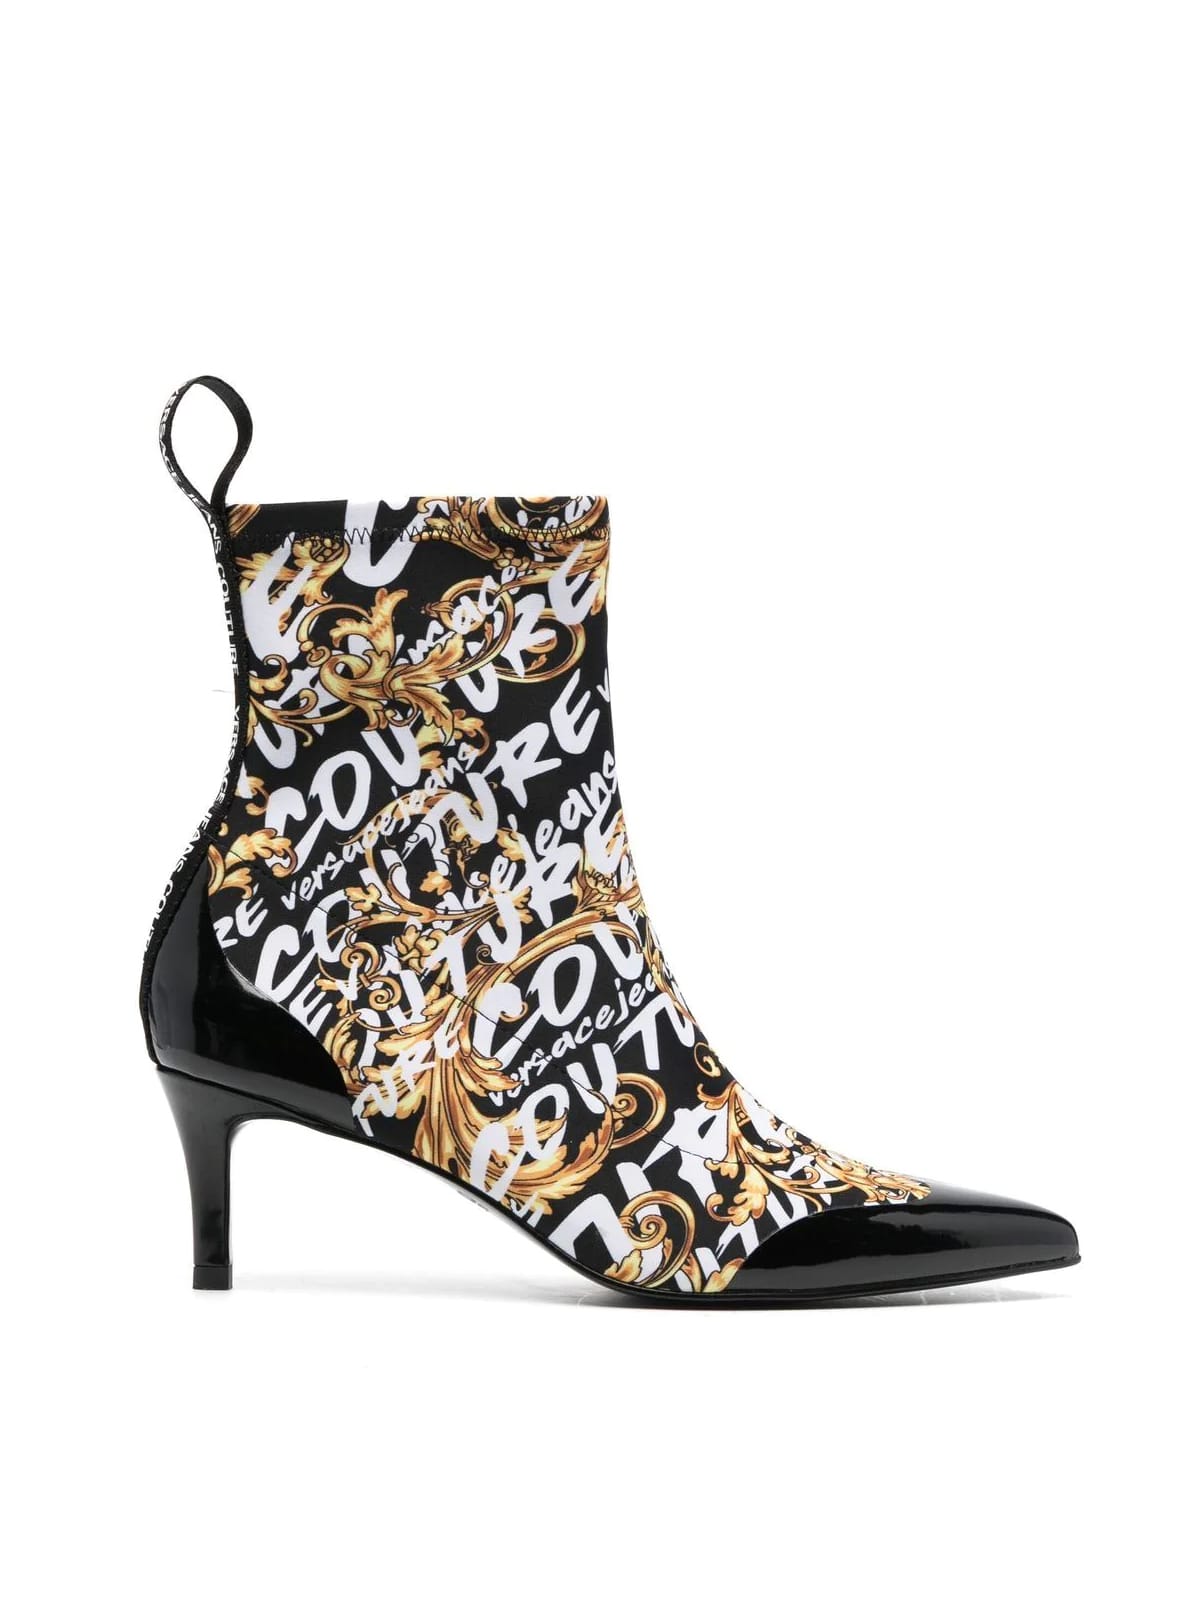 Versace Jeans Couture Fondo Lula Dis 63 Printed Pumps Boots